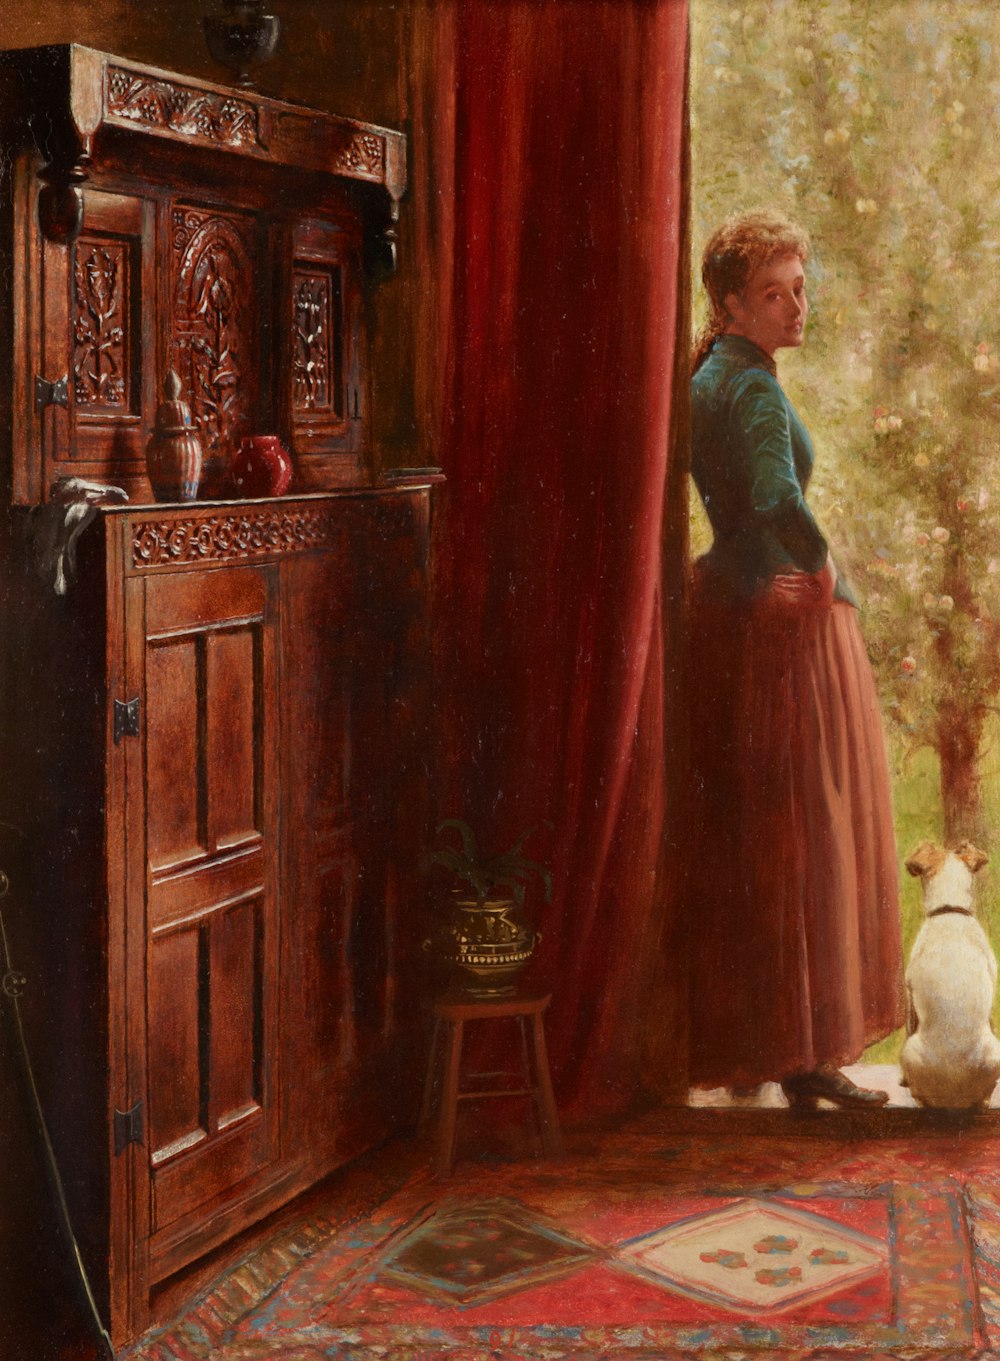 a painting of a woman looking out a window